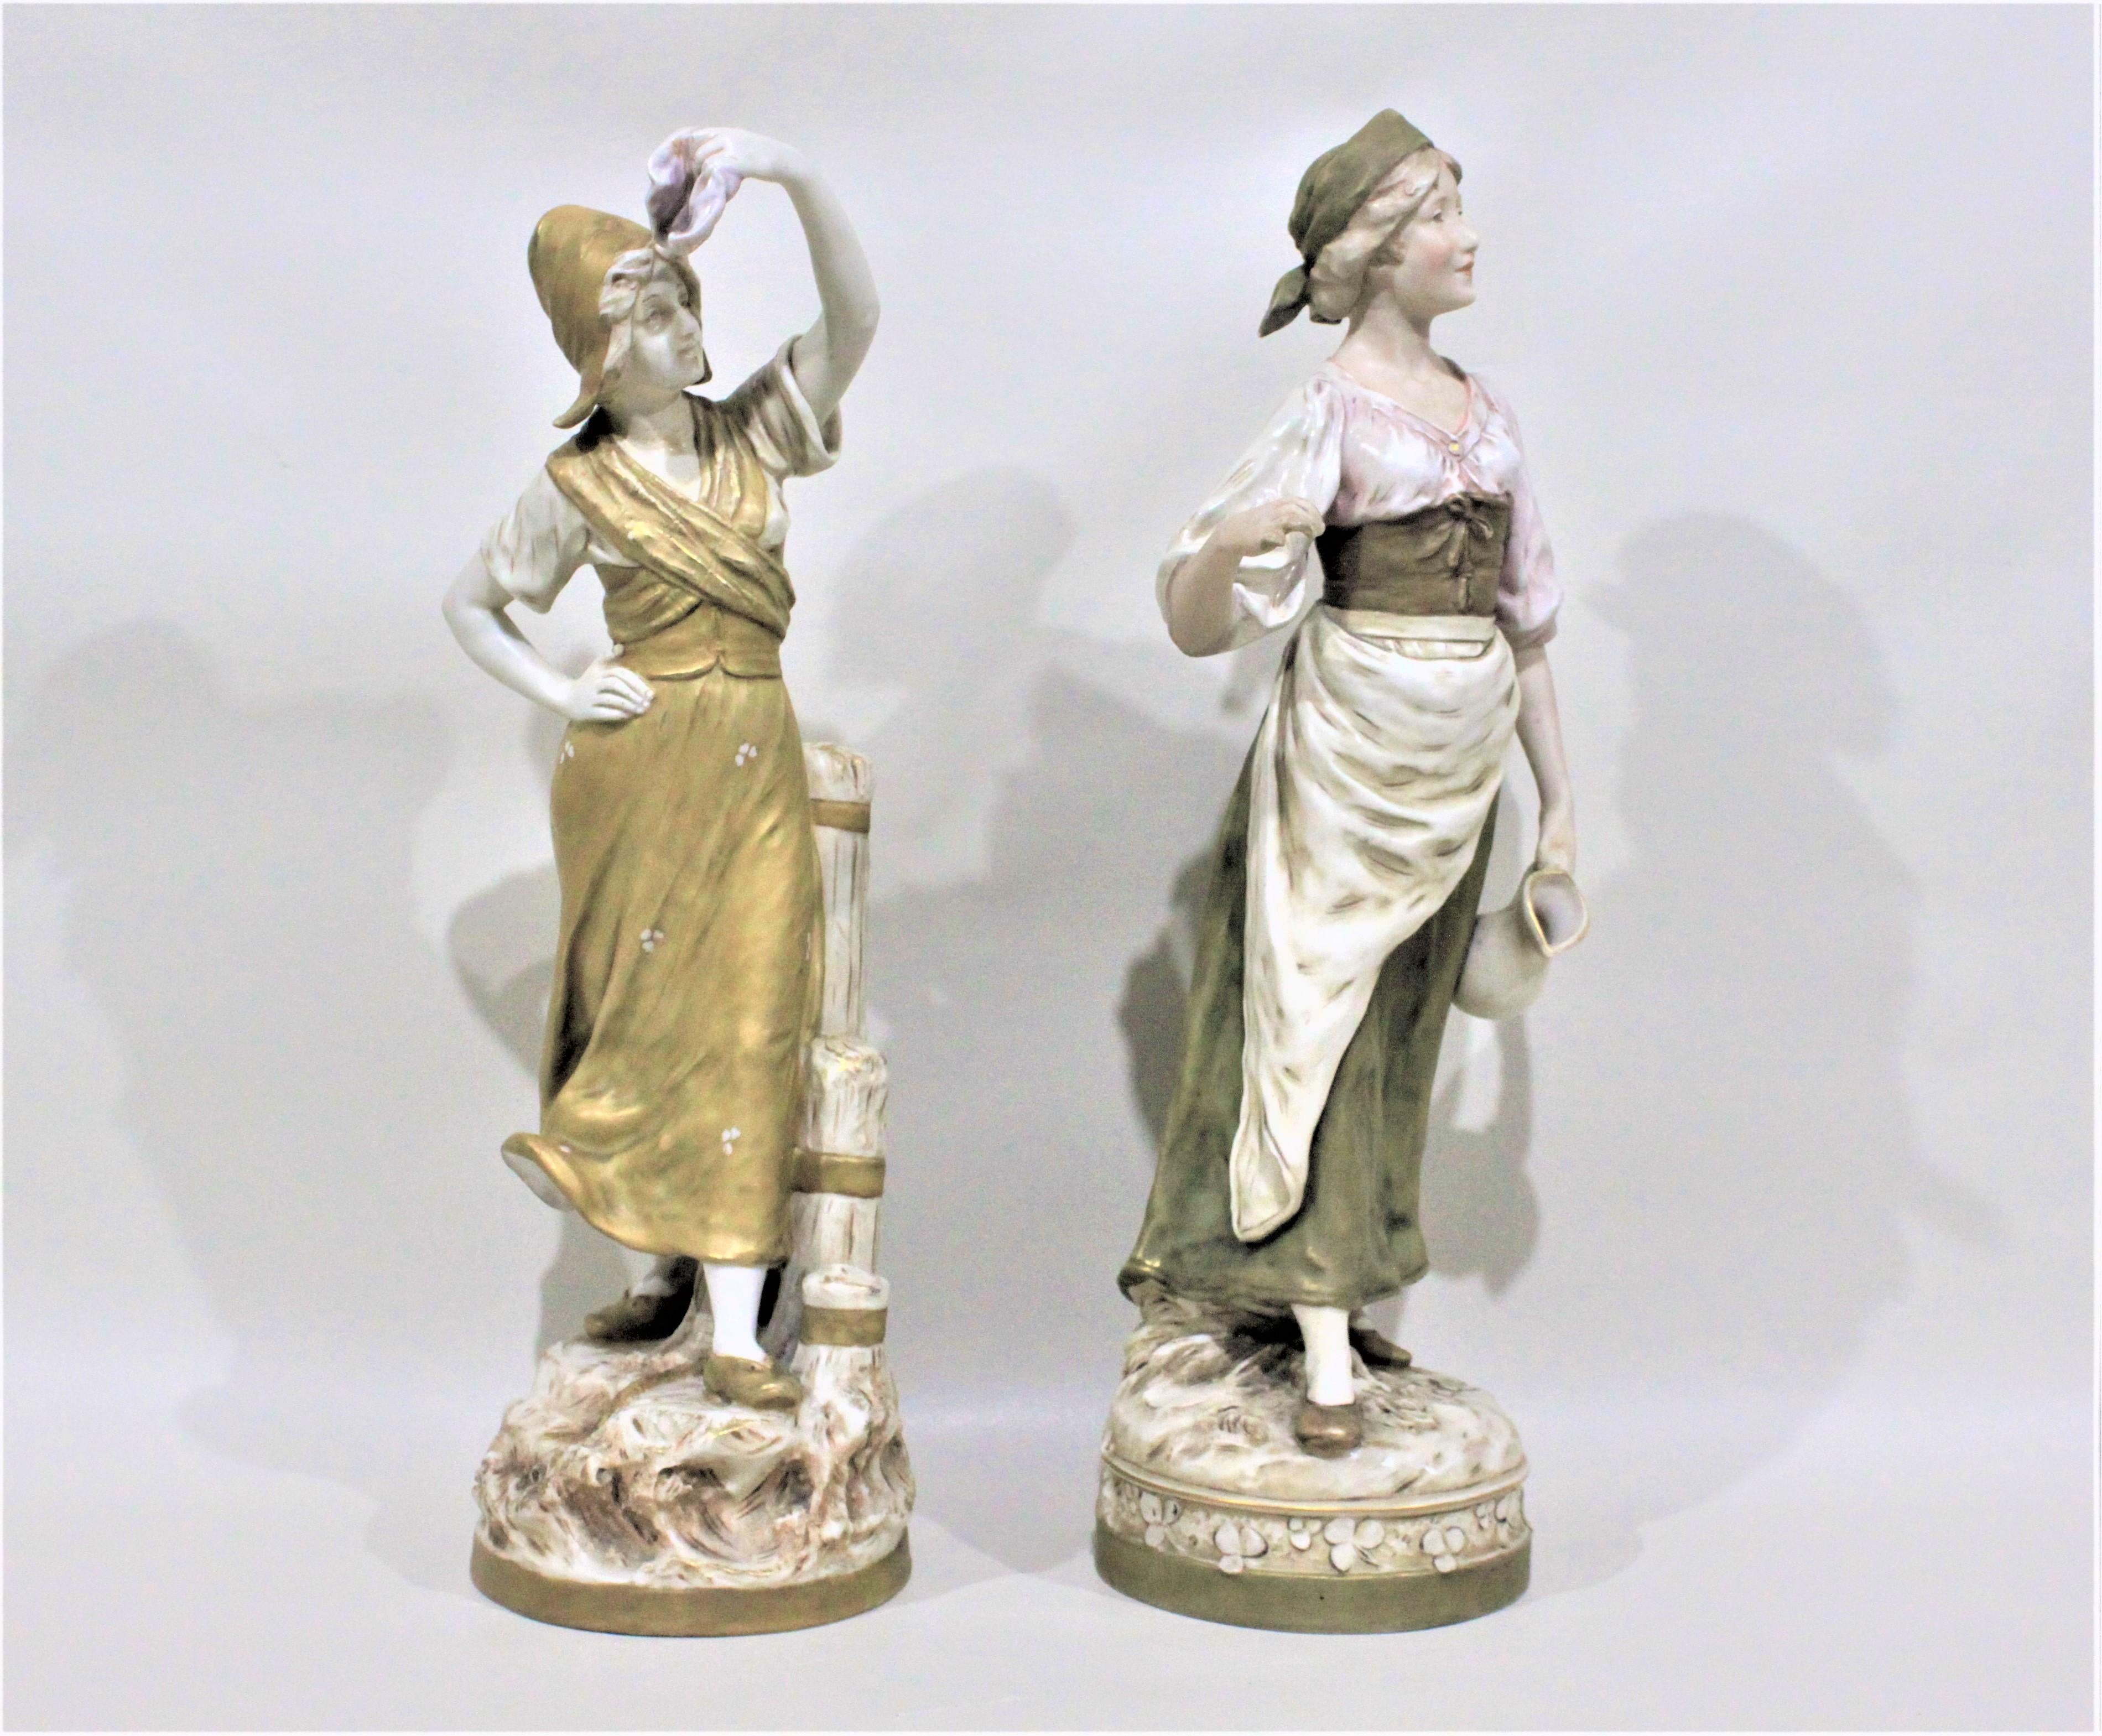 This pair of porcelain figurines were made by Royal Dux in approximately 1900 in the period and style of Art Nouveau. Both figurines are clearly marked with the early Royal Dux signature triangle and each stands approximately 17 inches in height.